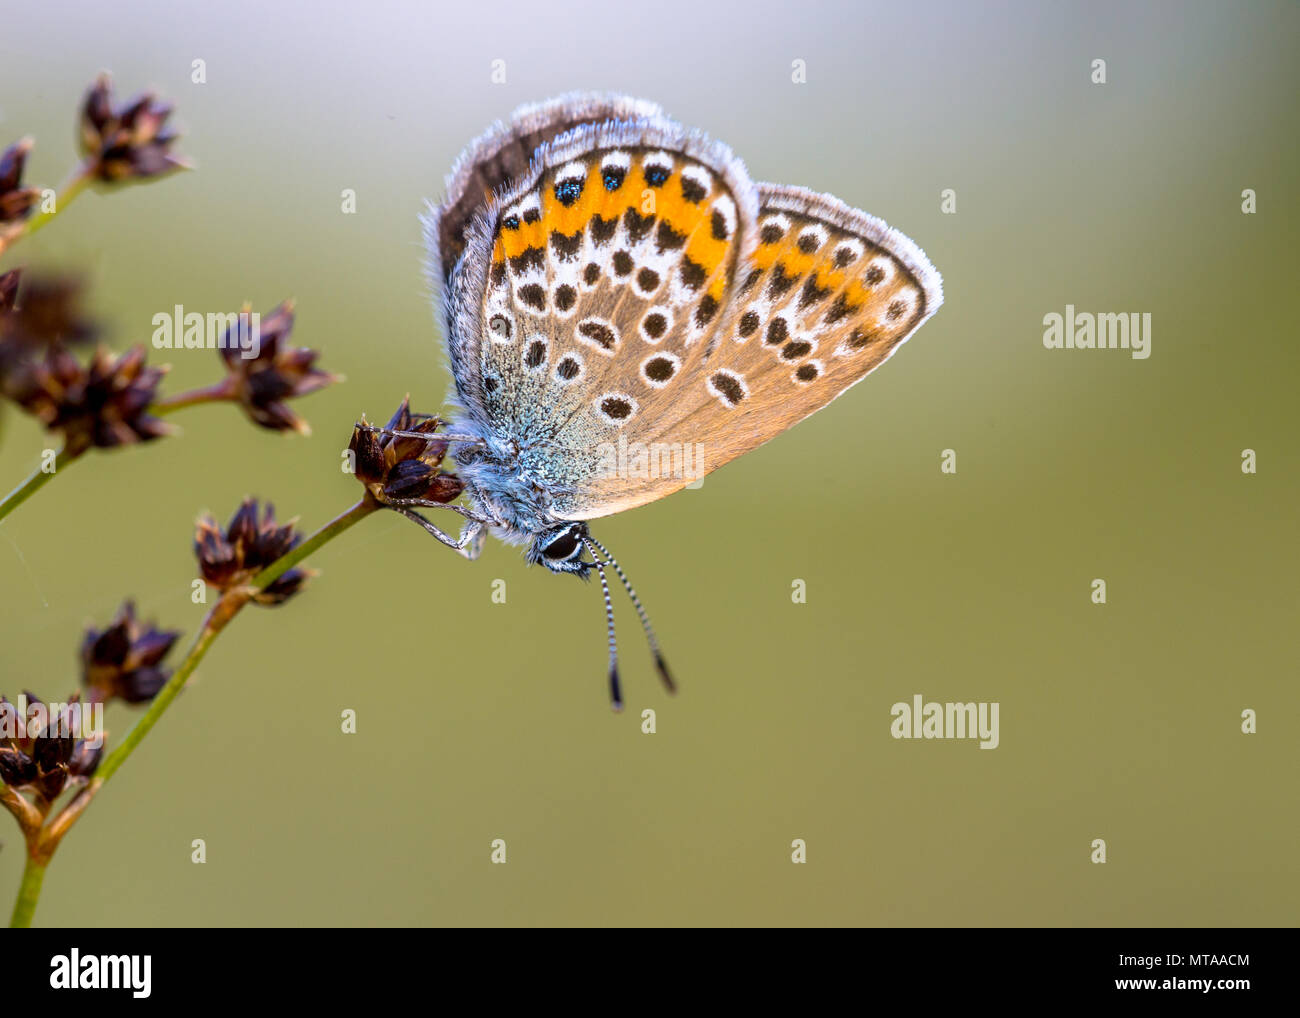 Female Silver-studded blue (Plebejus argus) butterfly resting and preparing for night on Sharp-flowered Rush (Juncus acutiflorus) in natural habitat Stock Photo